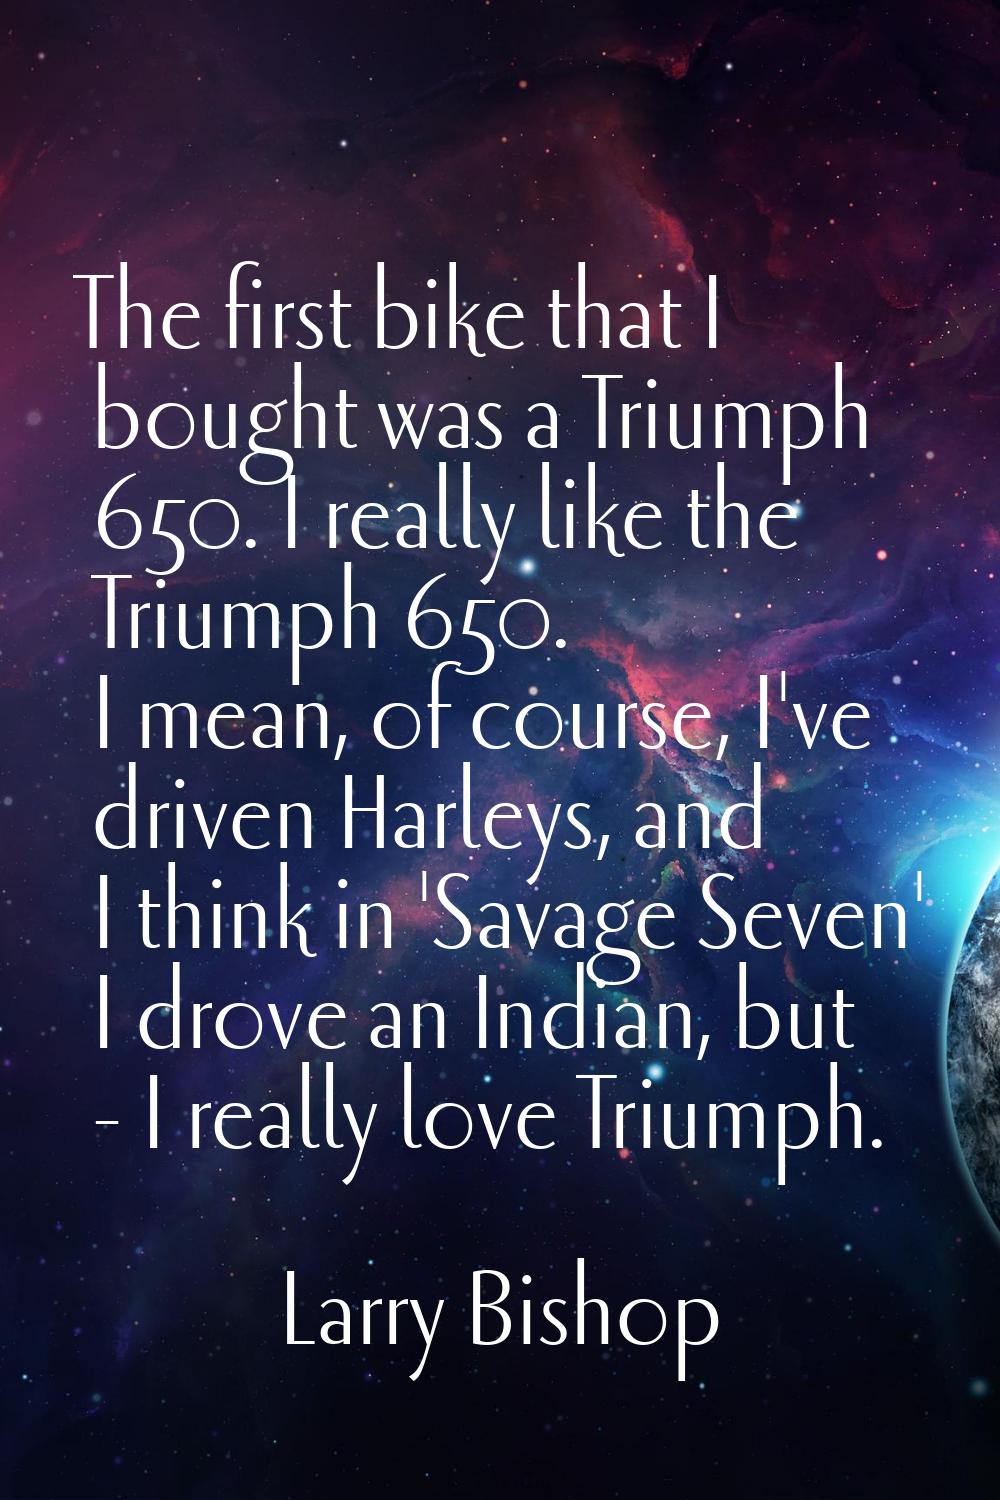 The first bike that I bought was a Triumph 650. I really like the Triumph 650. I mean, of course, I